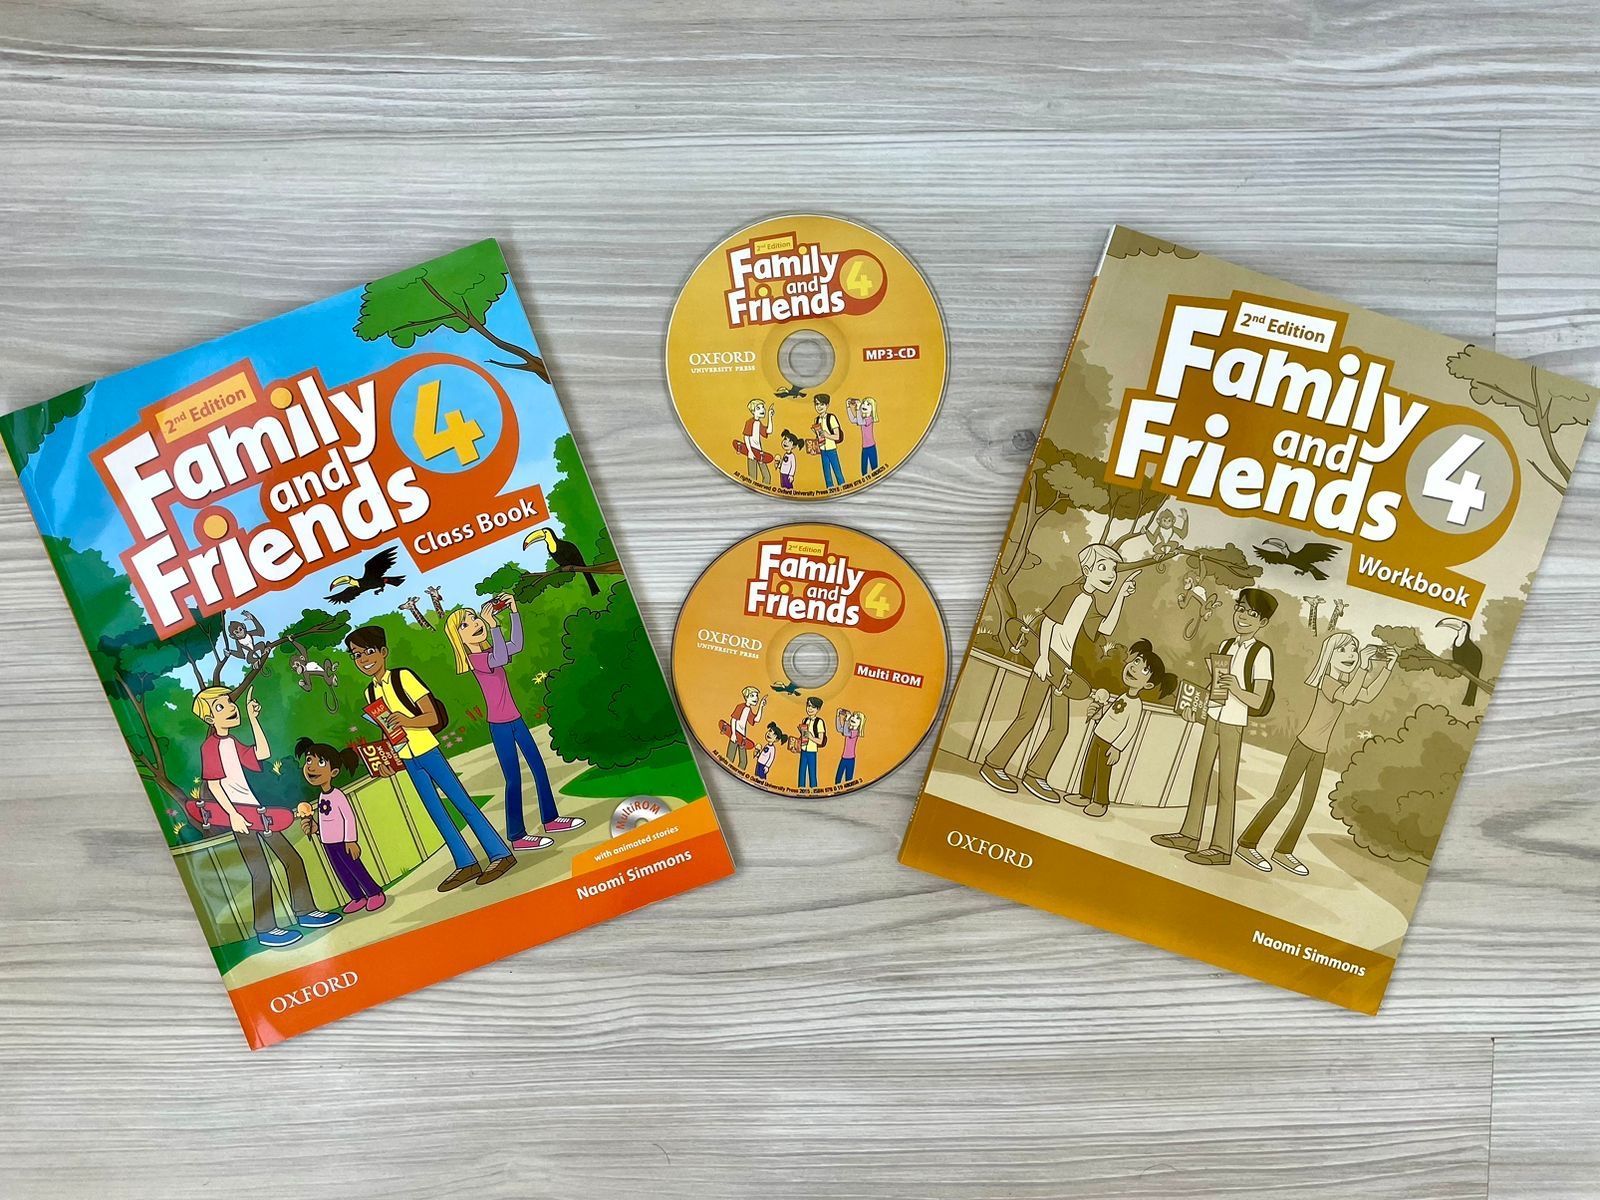 Family and friends 4 2nd edition workbook. Family and friends 2 2nd Edition. Family and friends 1 2nd Edition.